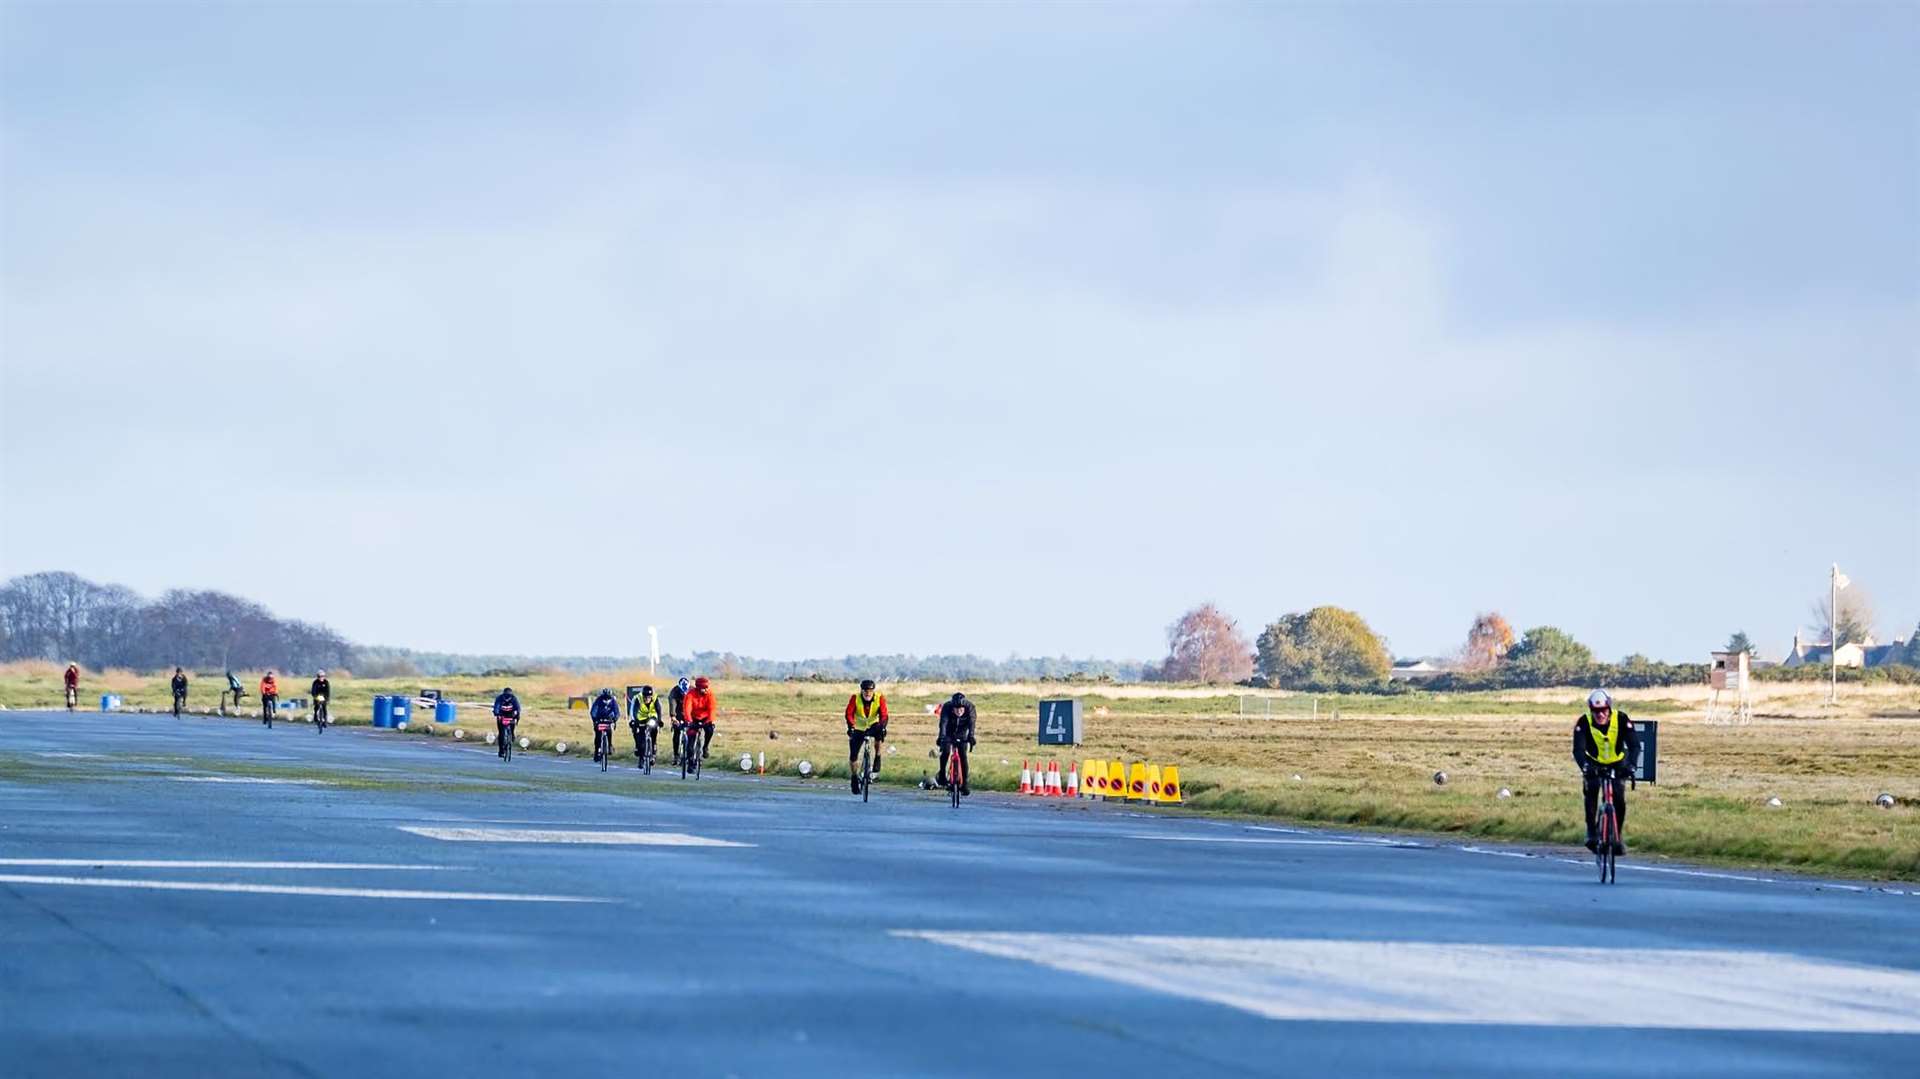 Riders were given the chance to race down the runway at Kinloss Barracks. Picture: Tony Carroll